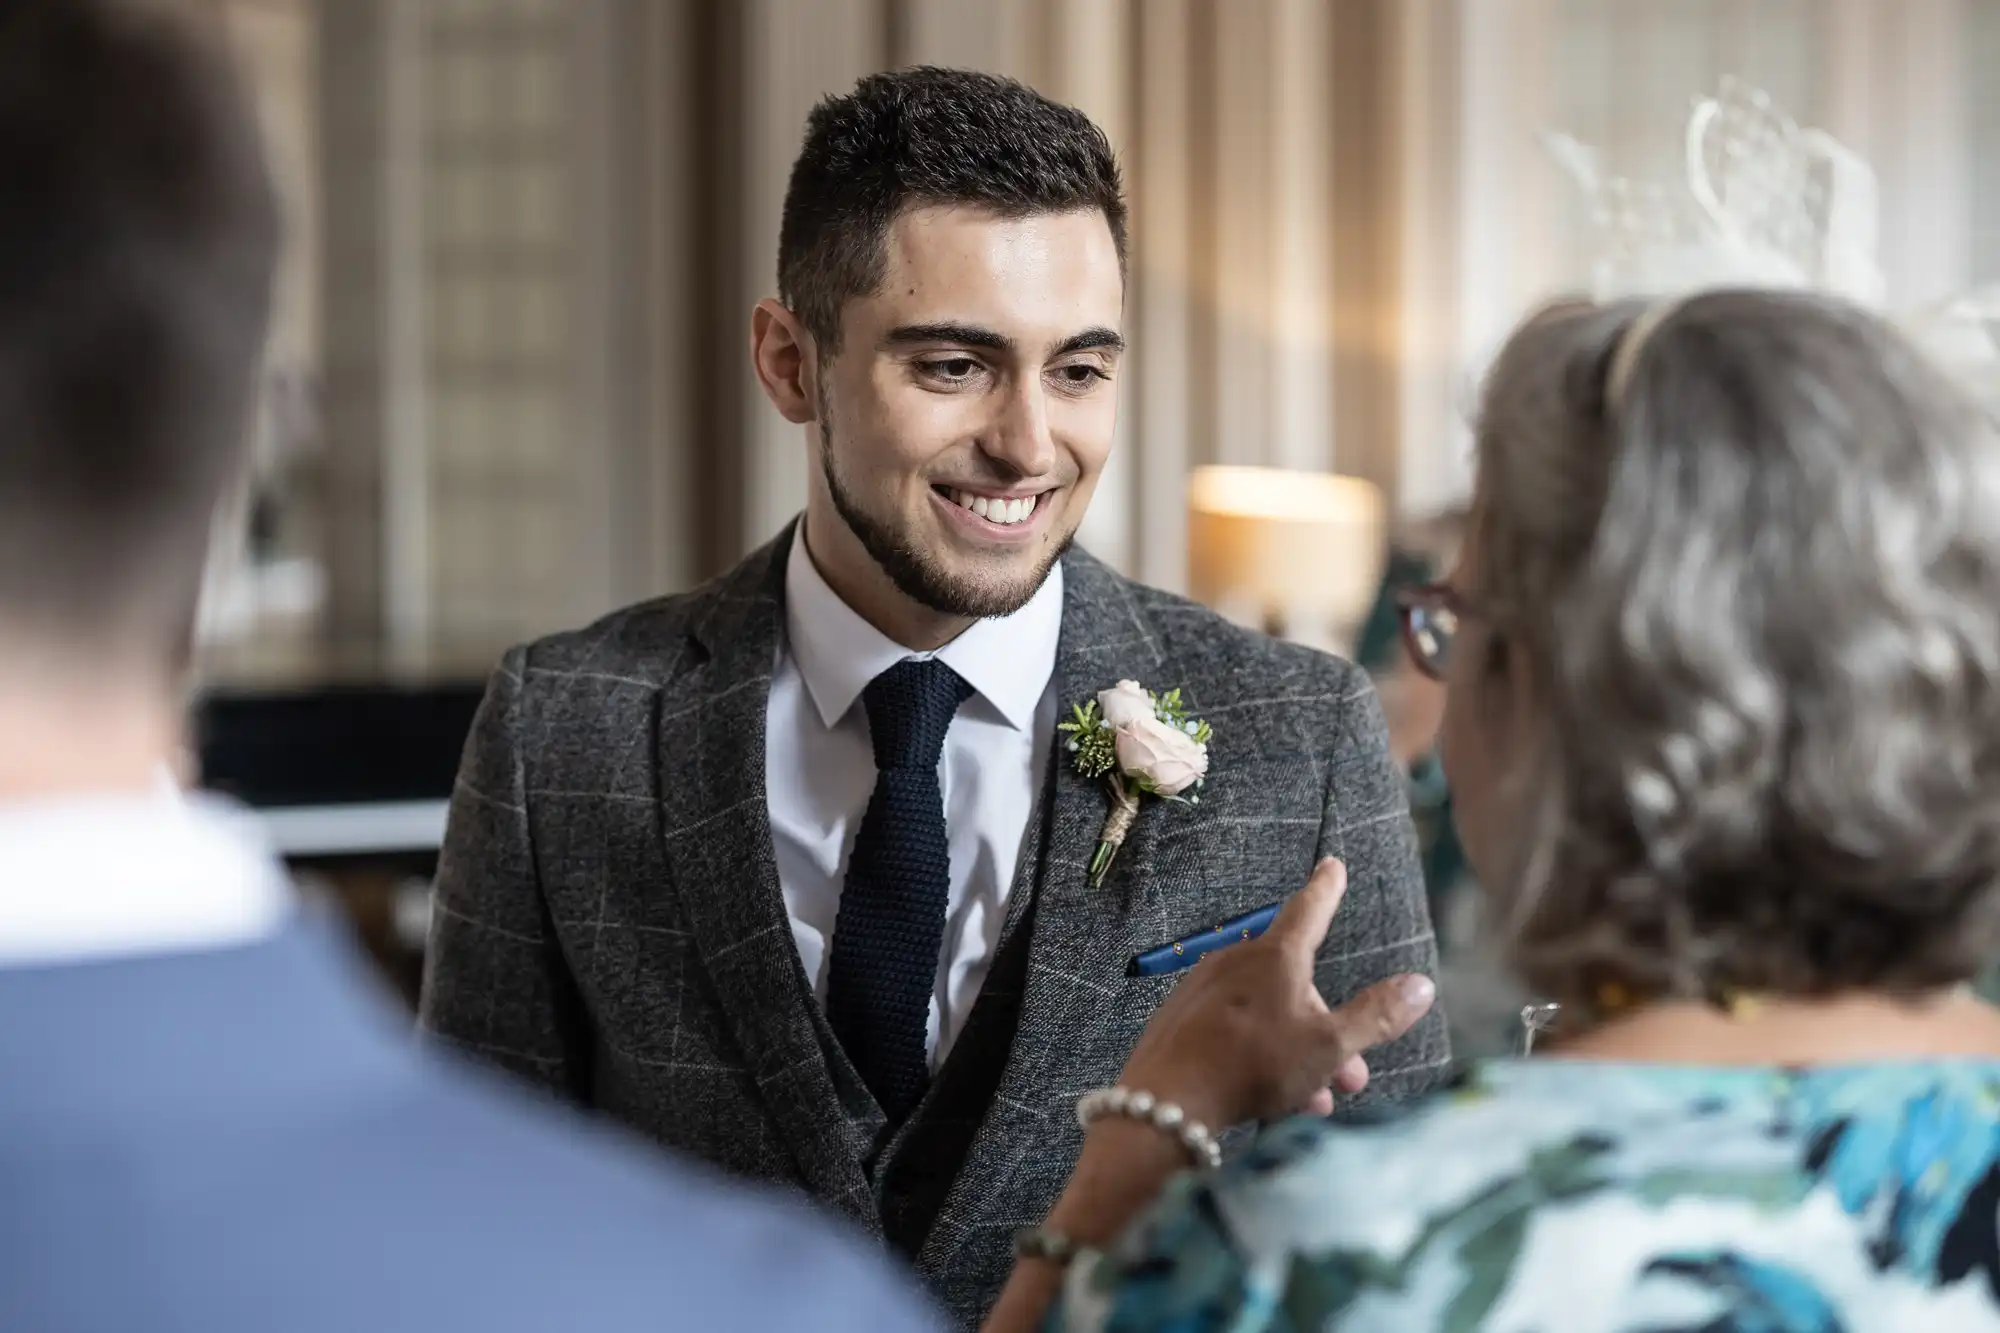 A smiling groom in a gray suit and boutonniere converses with wedding guests in an elegant room.